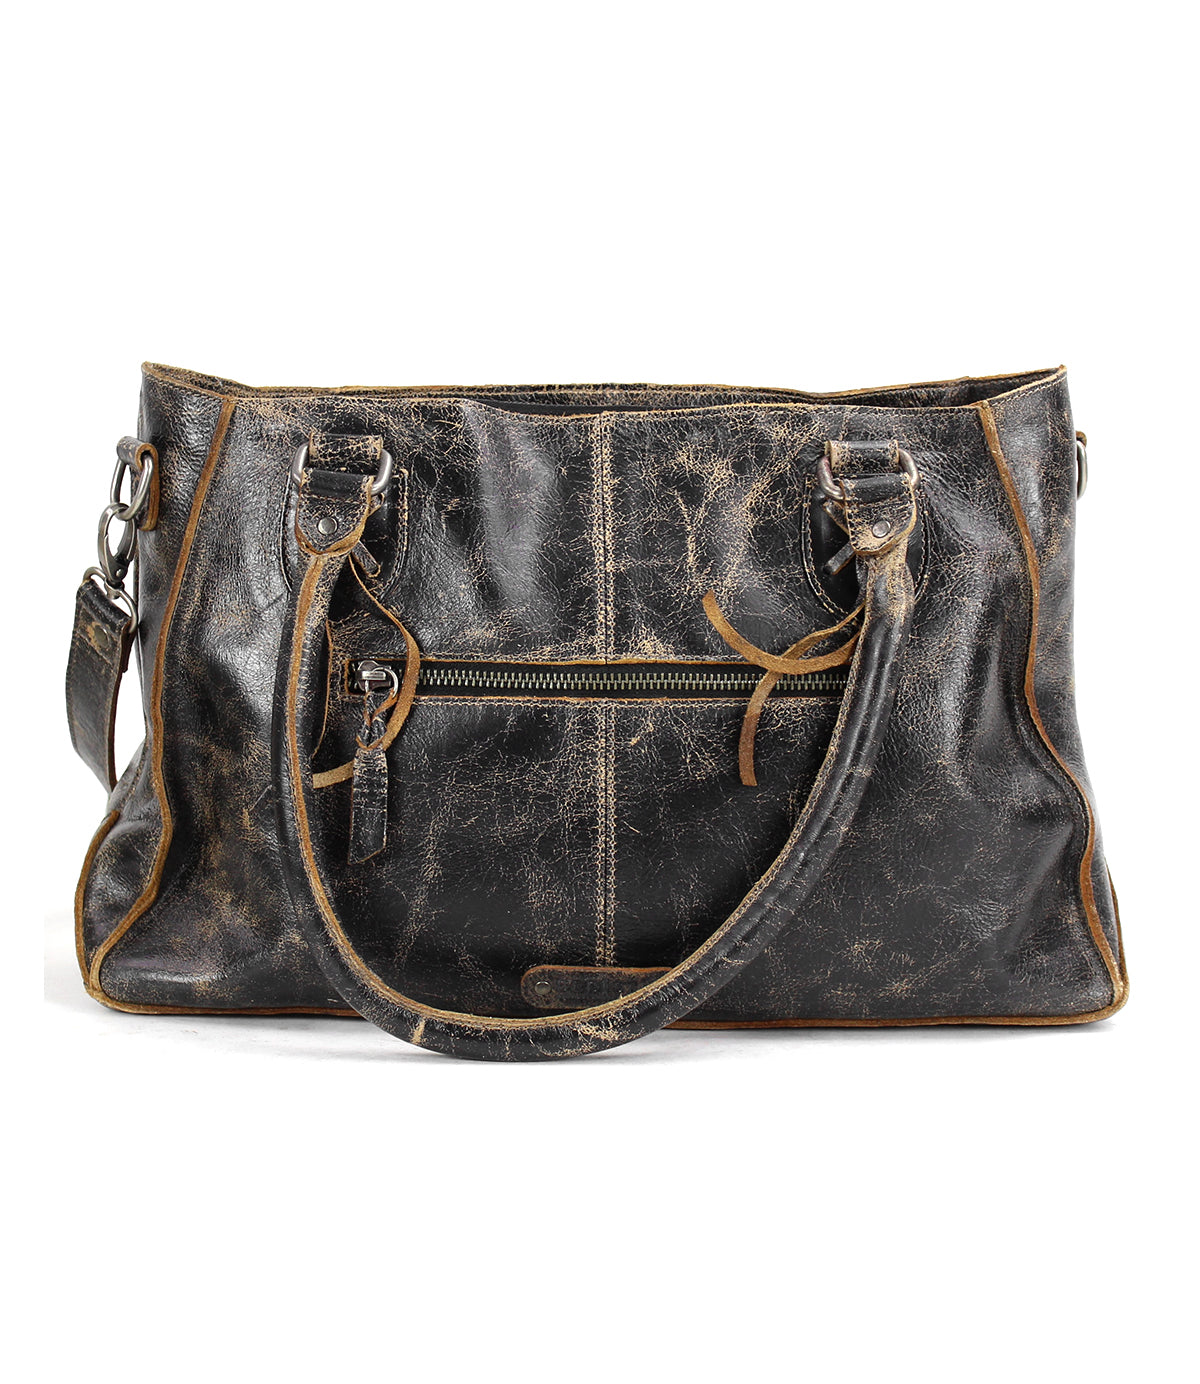 A worn black leather handbag, upcycled from scrap leather, with a front zipper pocket and double handles, isolated on a white background. (Rockababy SL by Bed Stu)